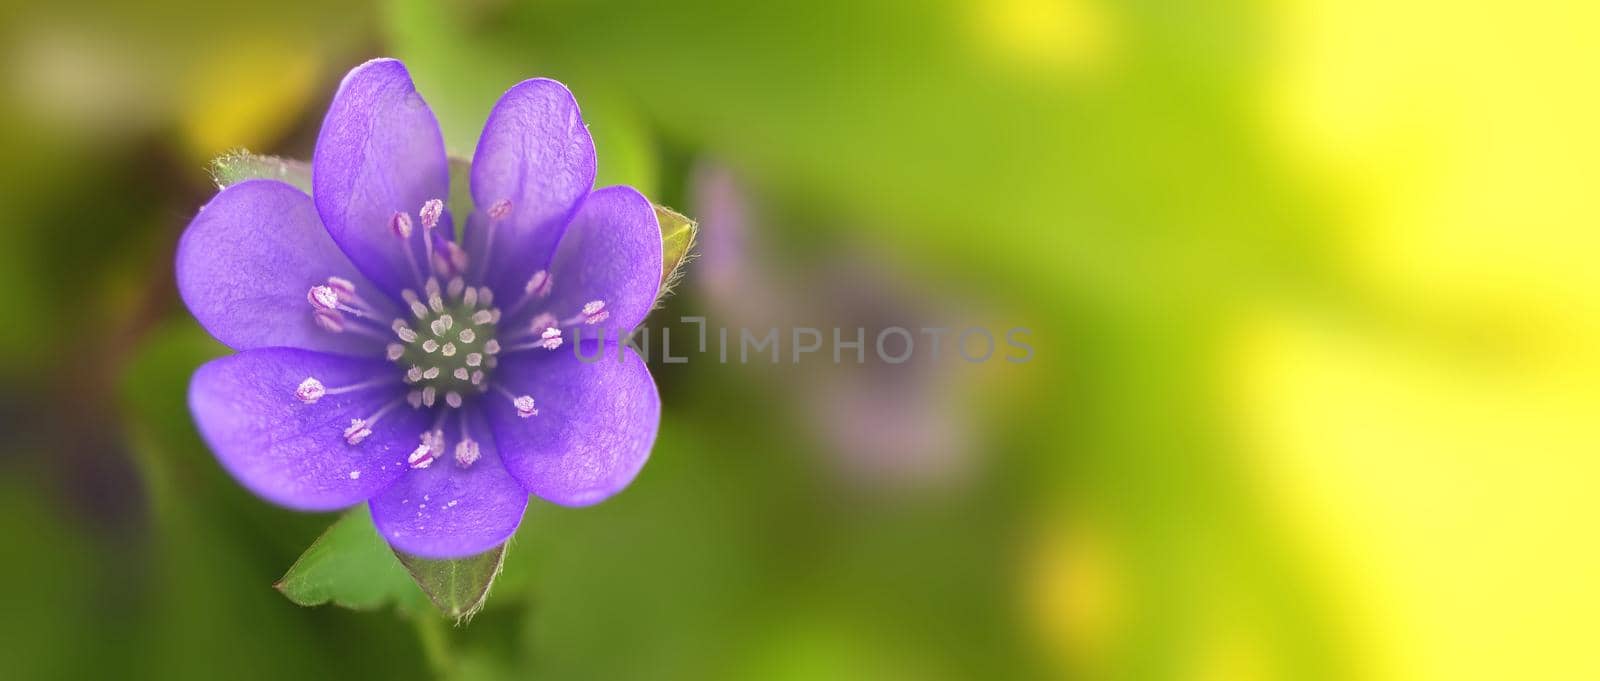 Blue Hepatica Nobilis in close-up, early blooming spring plants on yellow background. Long wide banner of greetings or holidays background with copy space